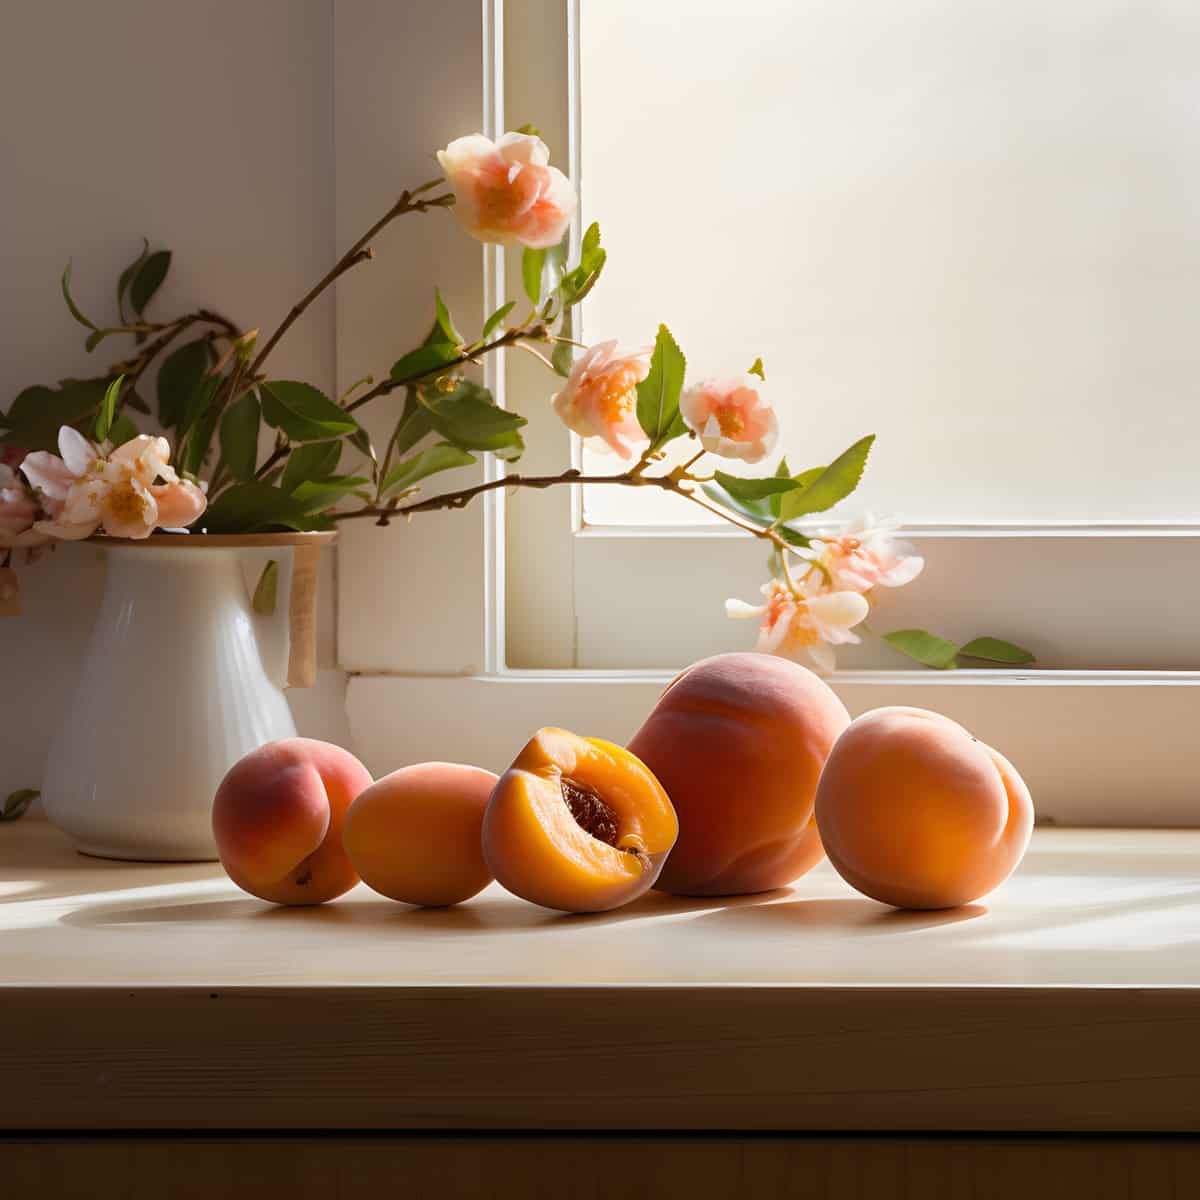 Apricot Plum on a kitchen counter